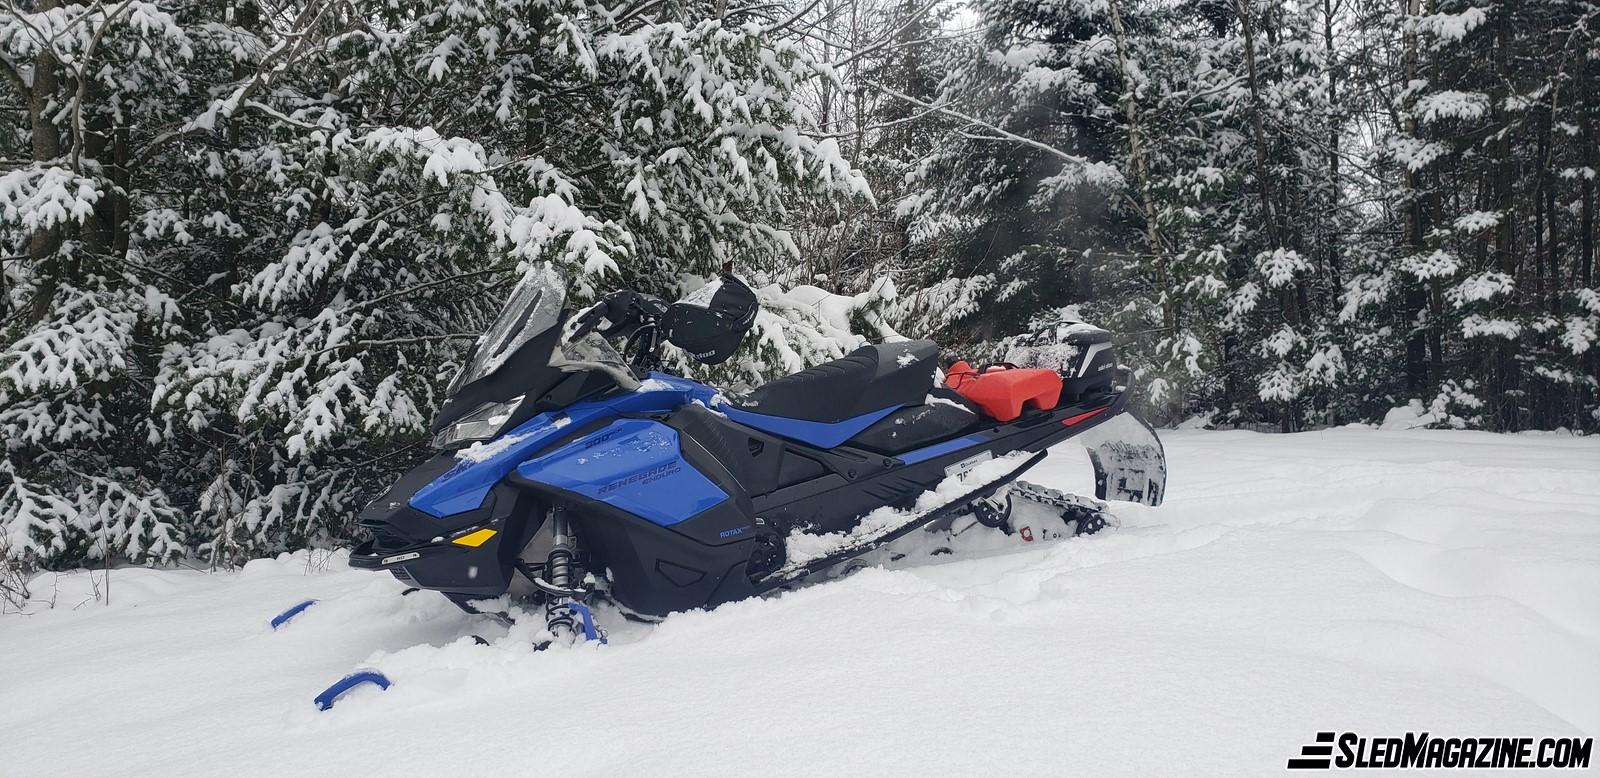 I Never Would Have Thought That… Snowmobile - Snowmobiler